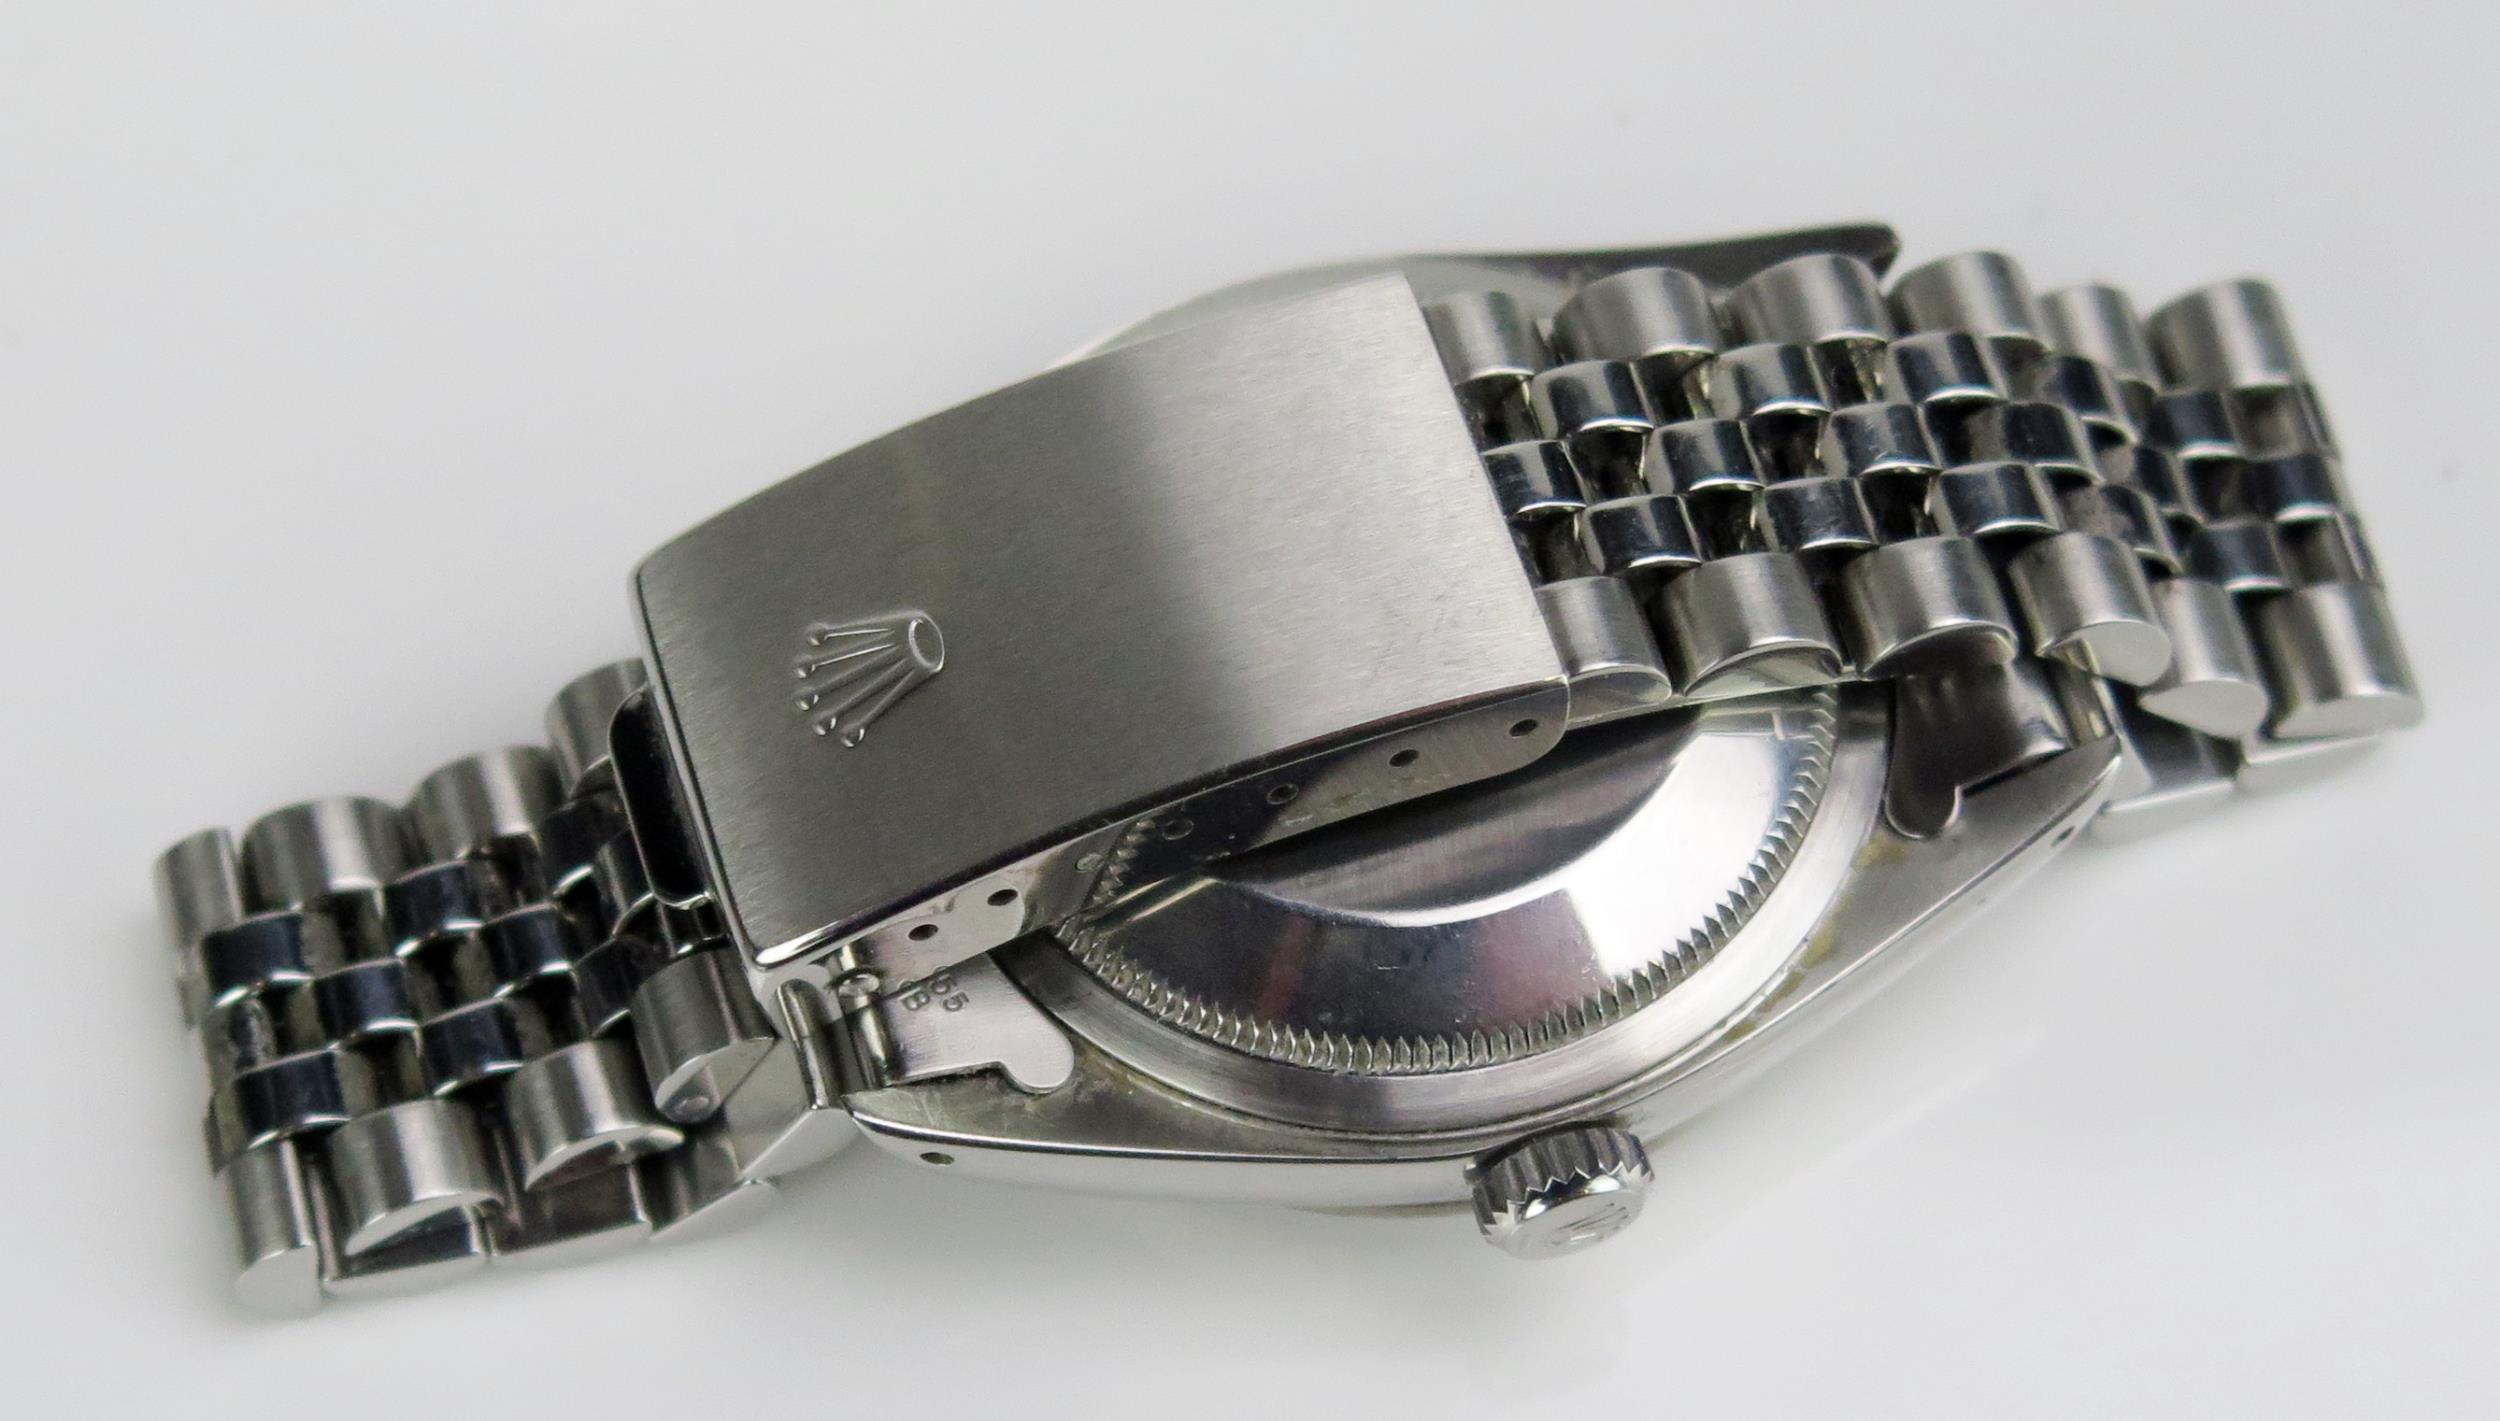 A ROLEX Gent's Oyster Perpetual Datejust S.C.O.C. Steel Cased Wristwatch on a 63600 Jubilee Bracelet - Image 8 of 10